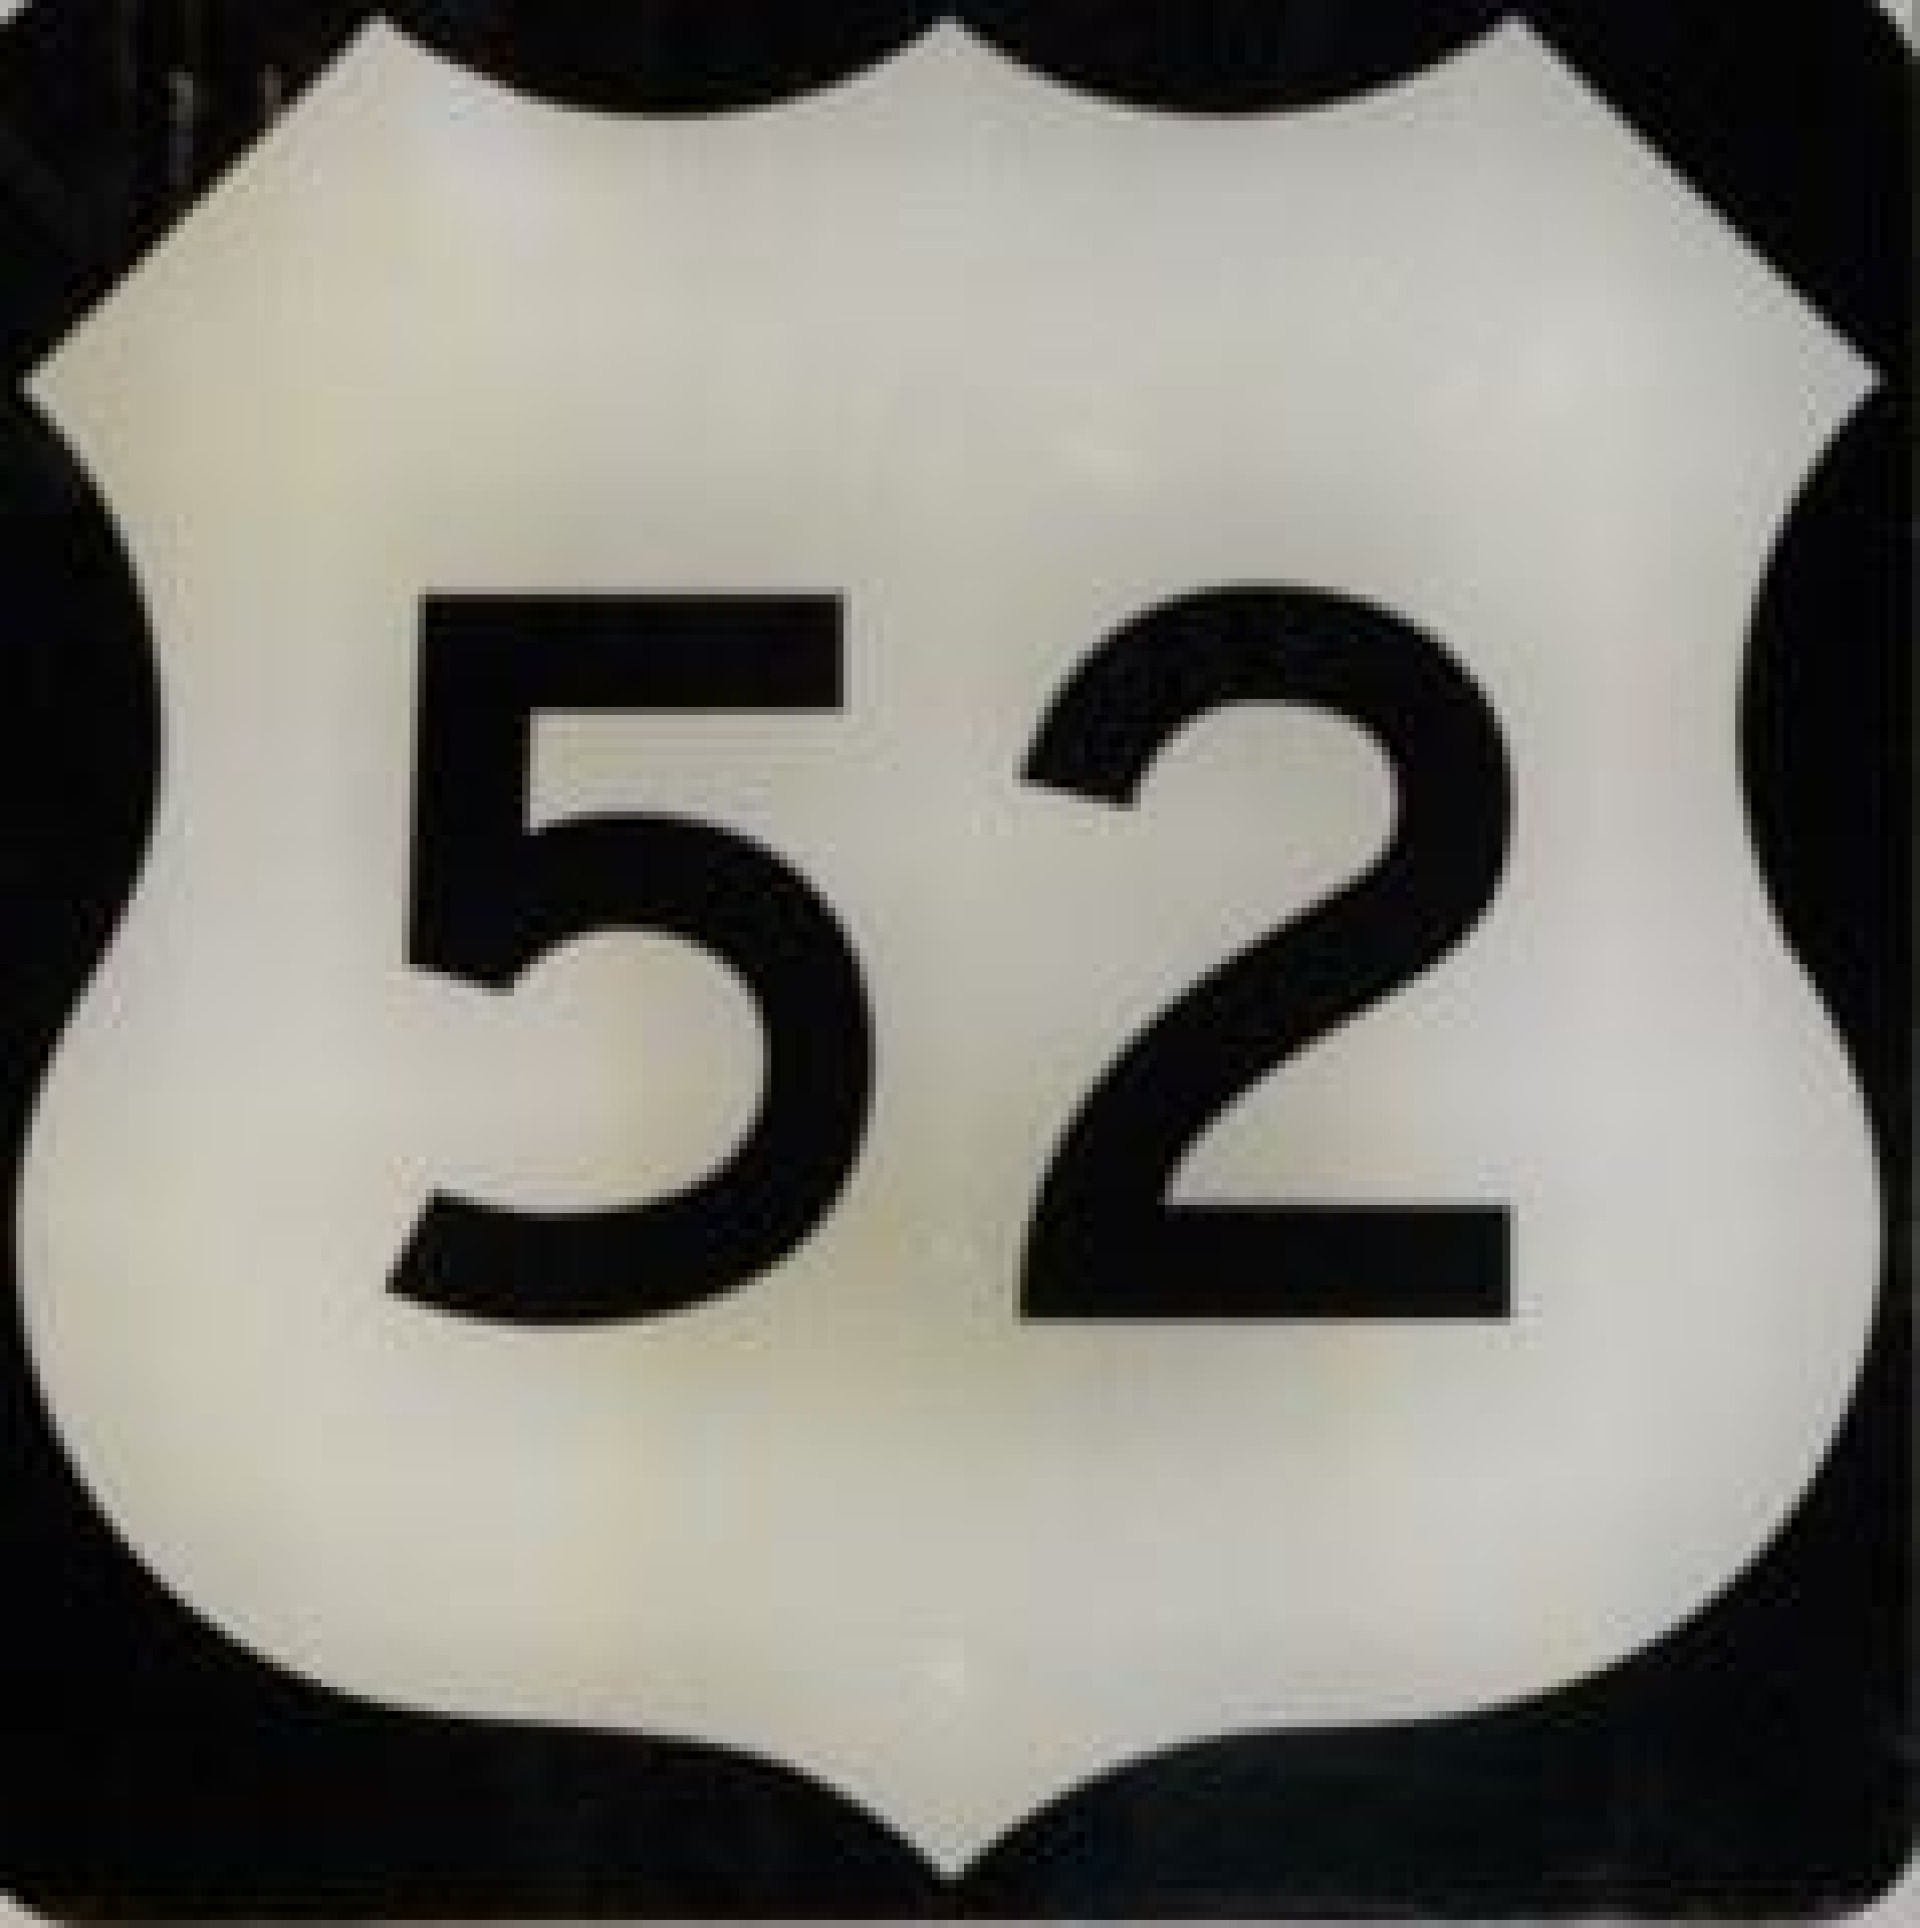 State highway road sign example.